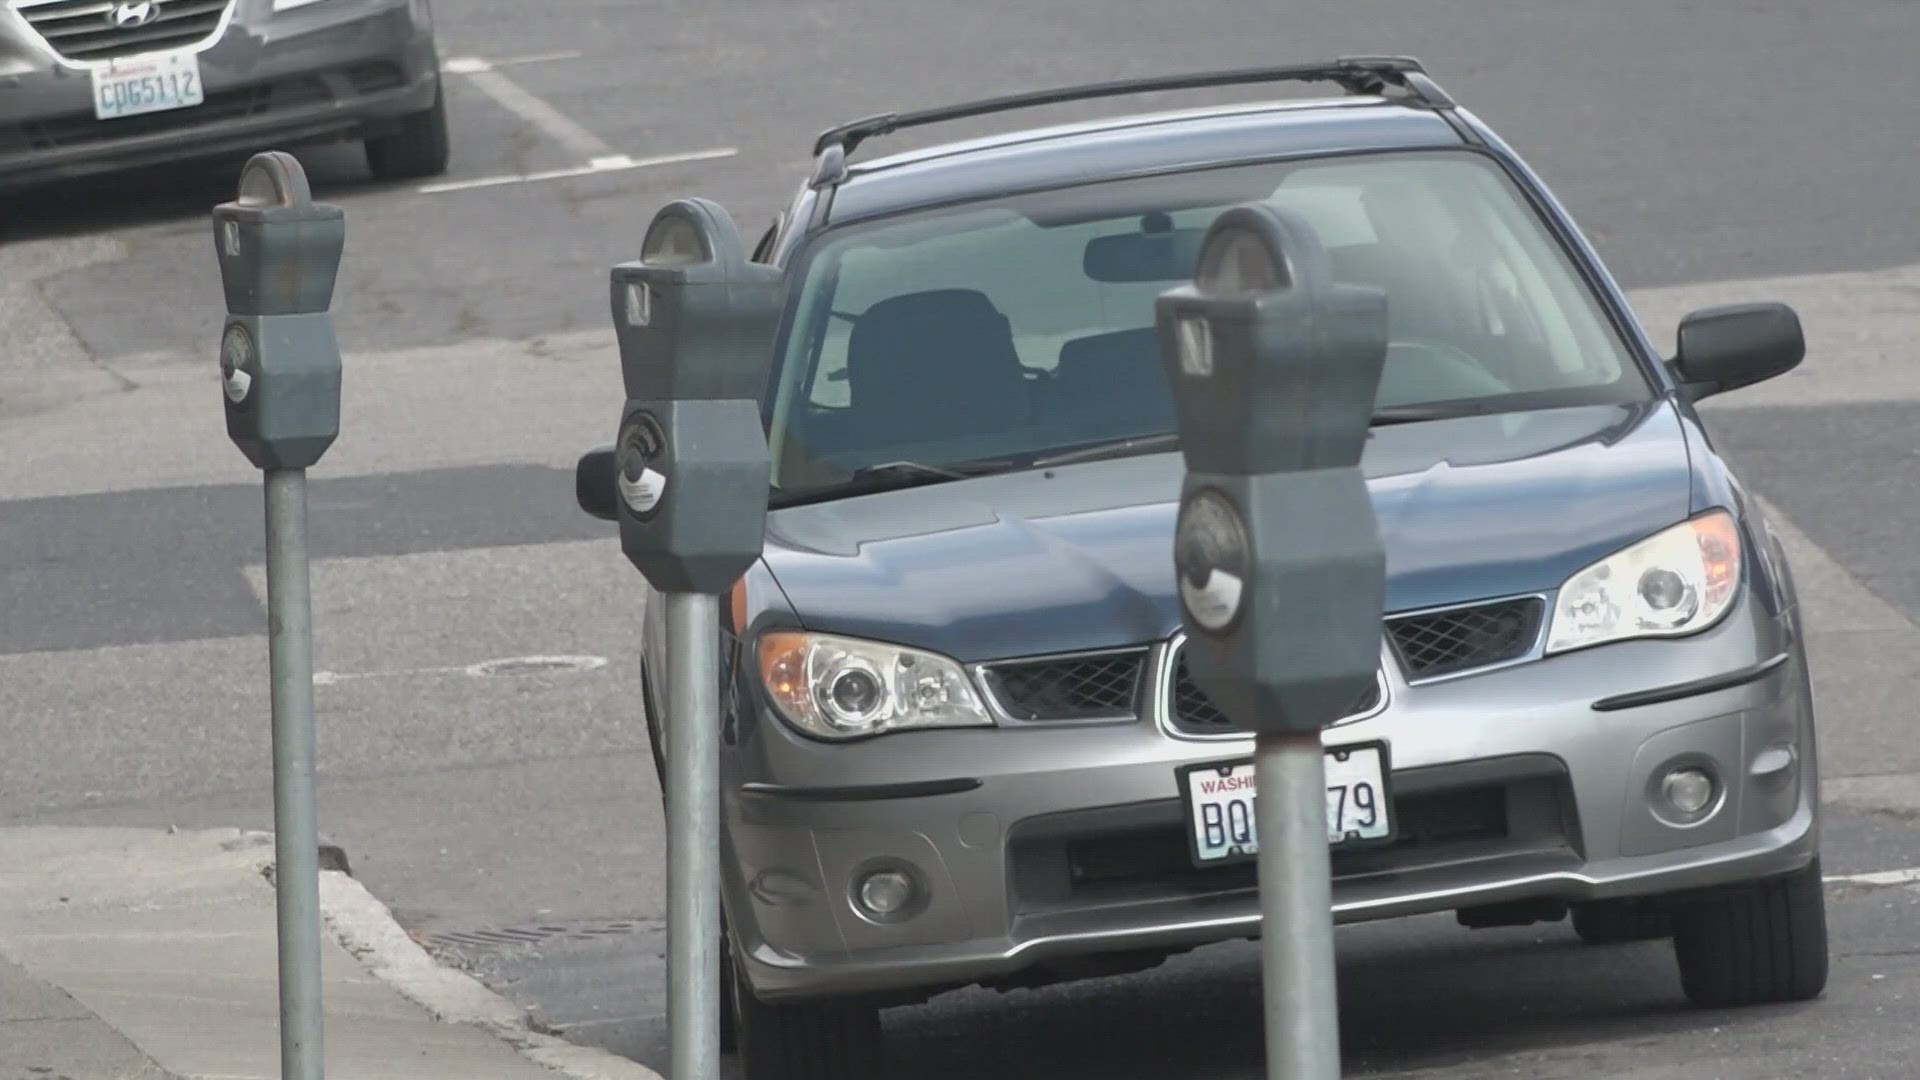 The Parking Services Director says a 50 cent increase to all parking in the City of Spokane would generate around $1.5 million increase in funds for the department.